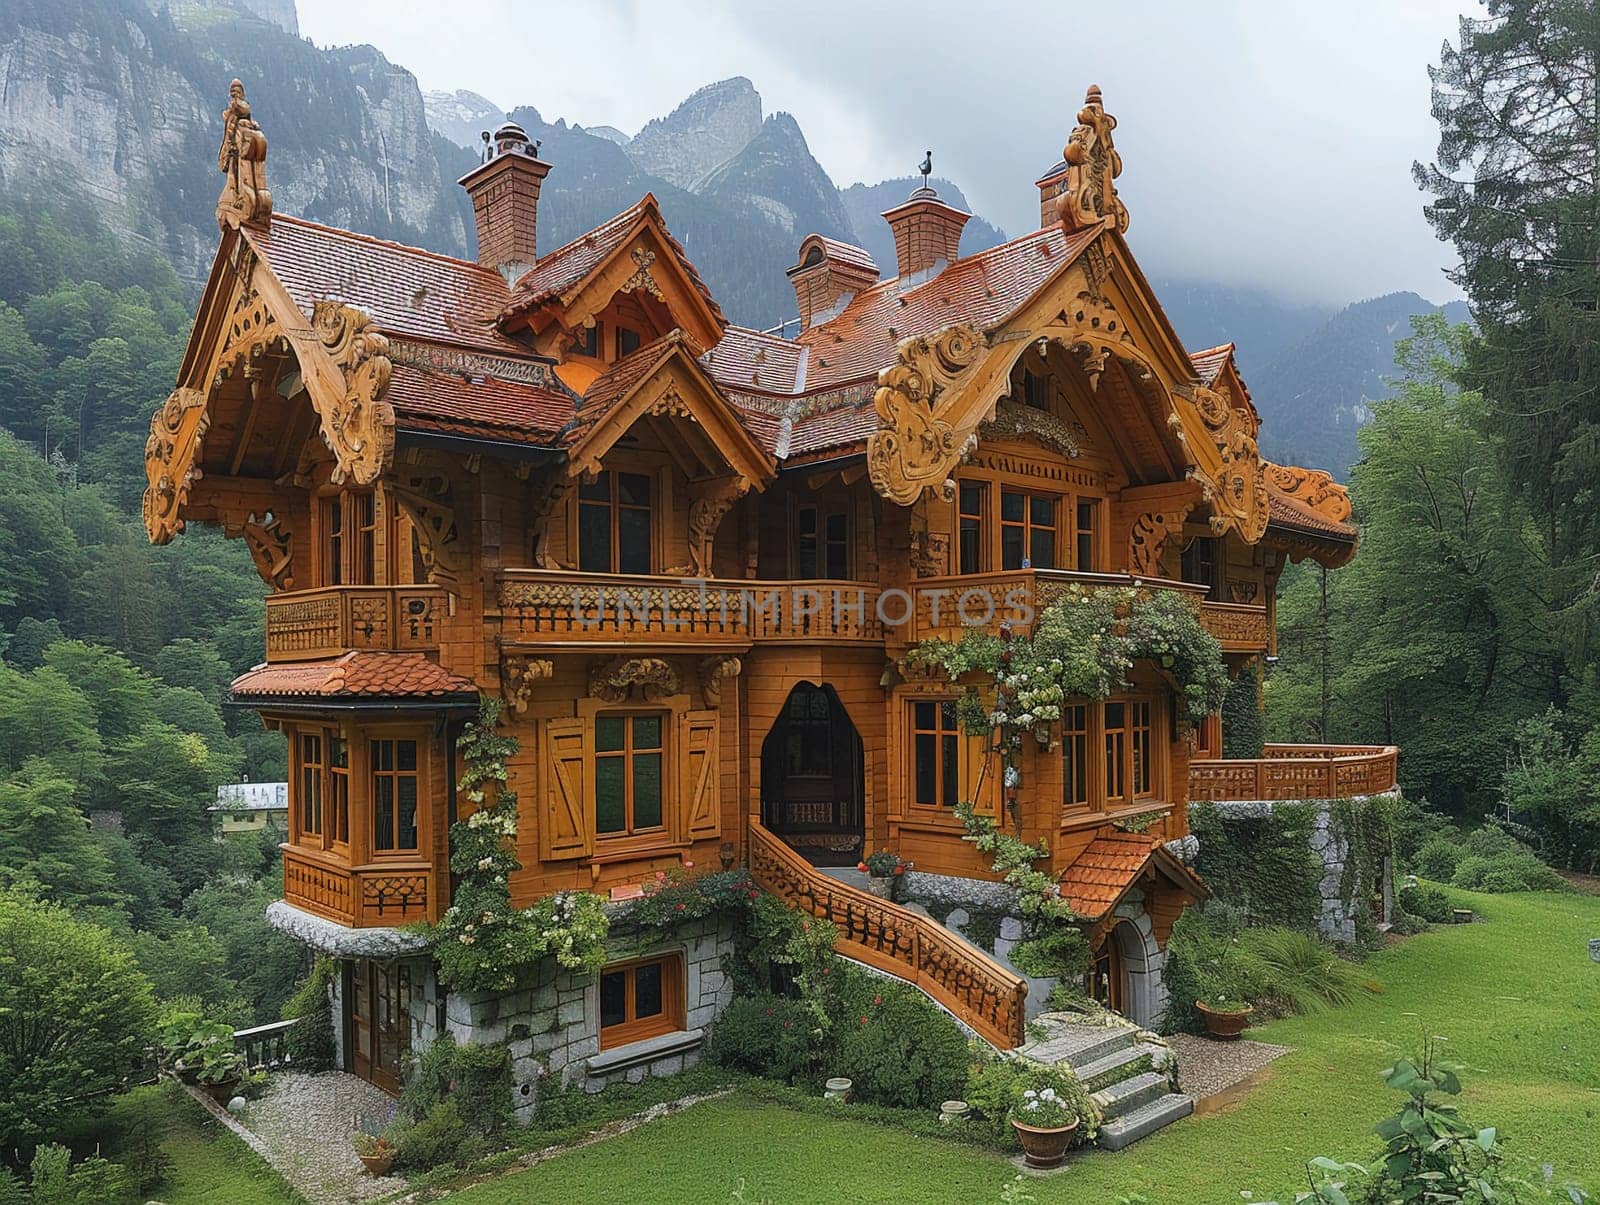 Traditional Swiss Chalet Nestled in Alps with Detailed Wood Carvings, Swiss chalet charm and craftsmanship.